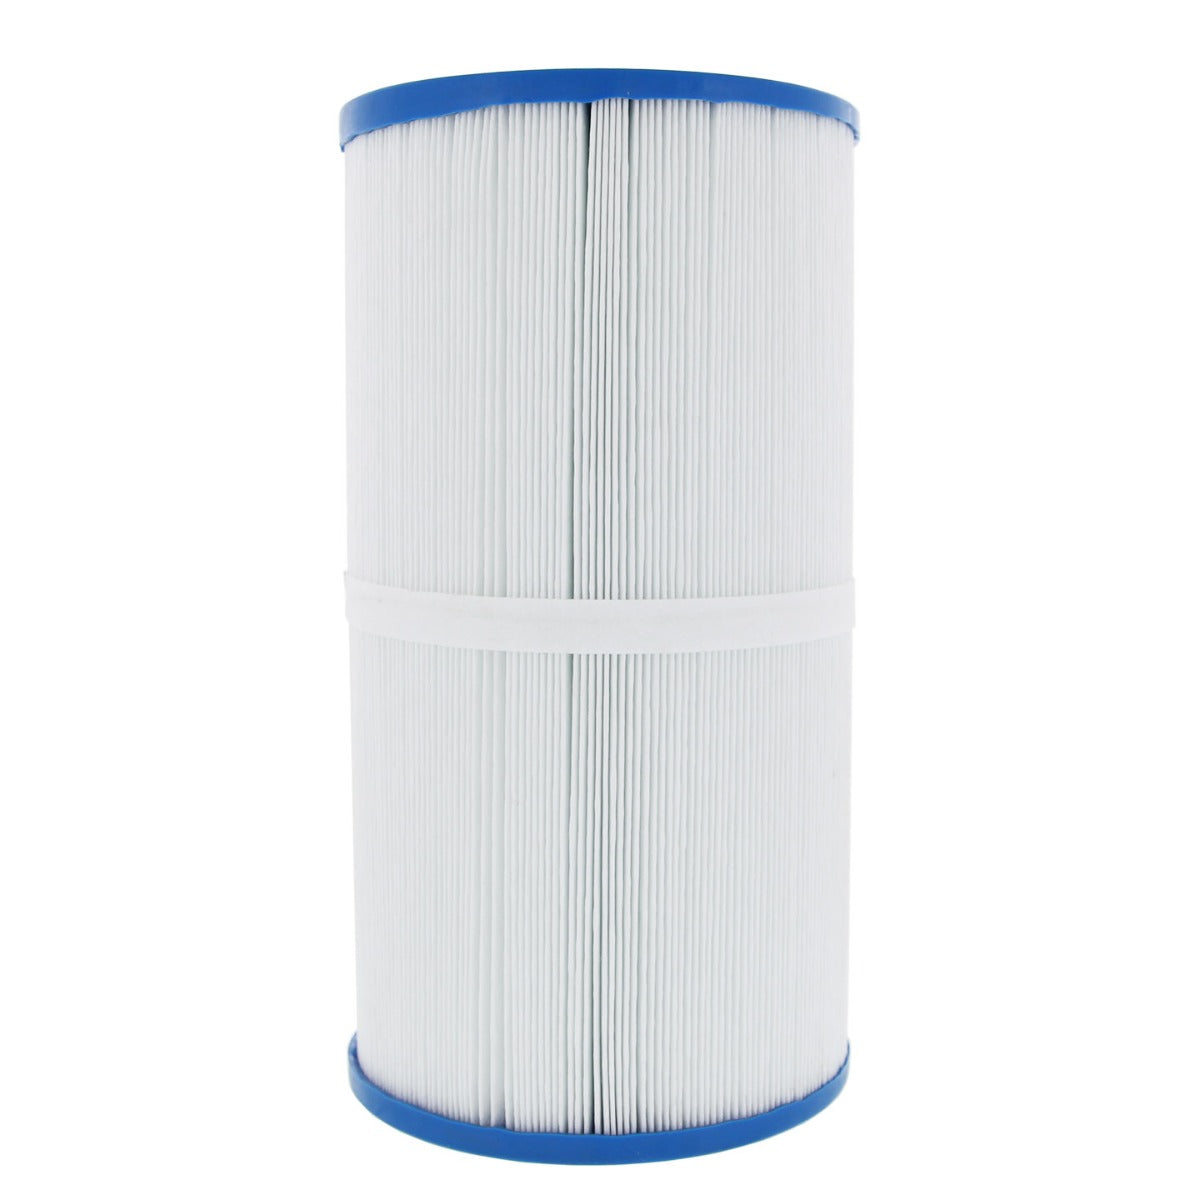 Tier1 Brand Replacement Filter for 03FIL1300, 17-2482, 25393, 303557, 817-3501, CCP269 & R173431